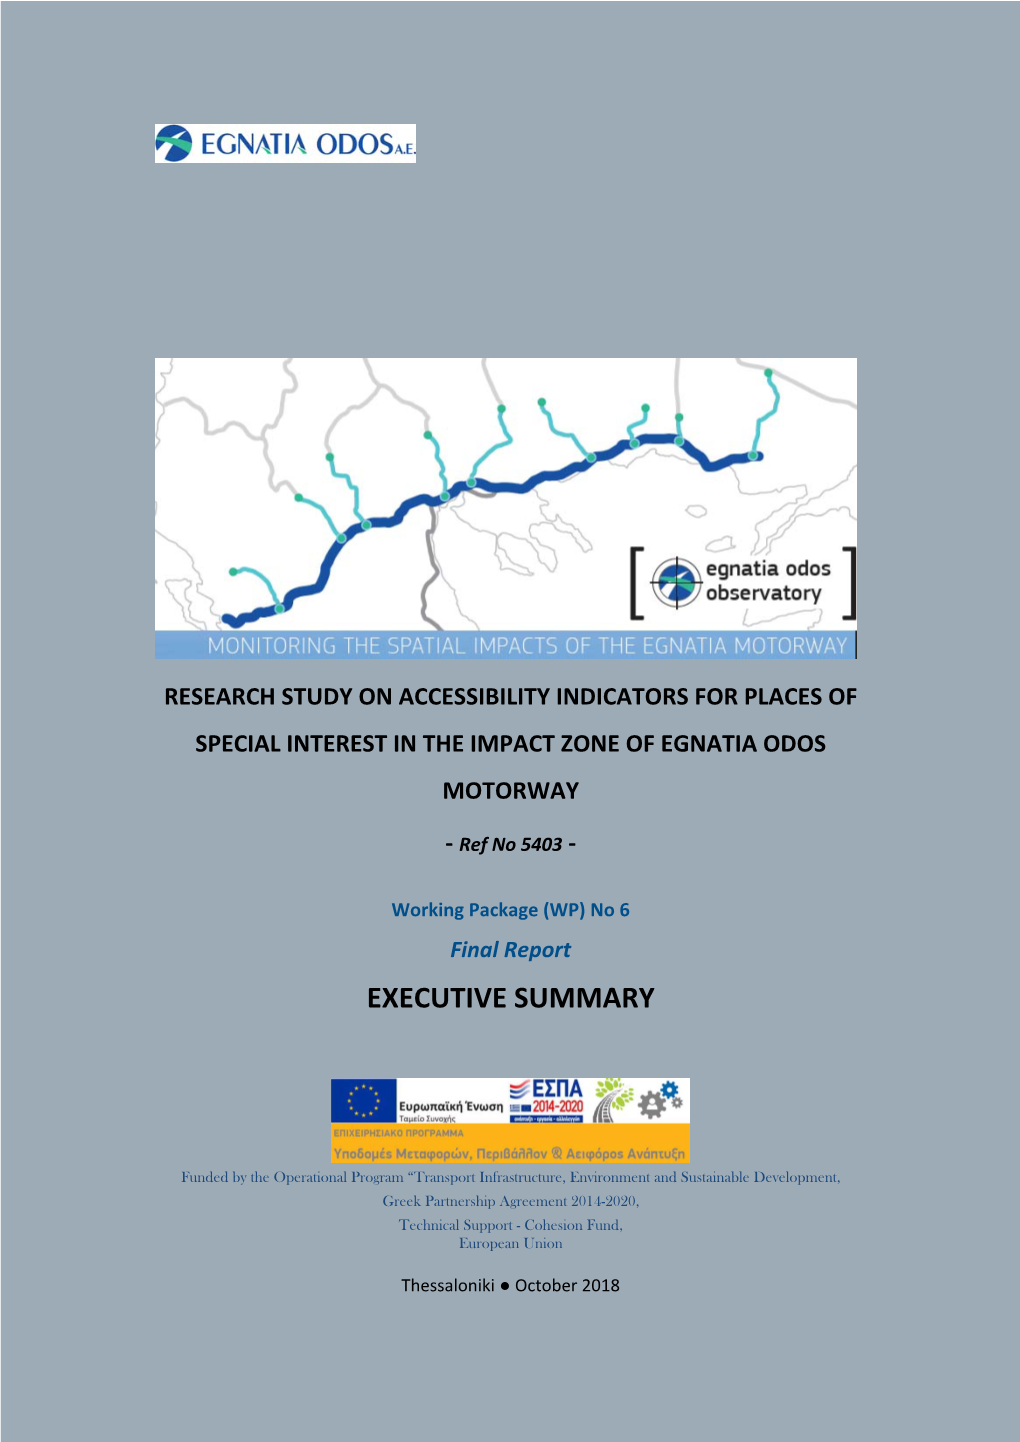 Research Study on Accessibility Indicators for Places of Special Interest in the Impact Zone of Egnatia Odos Motorway